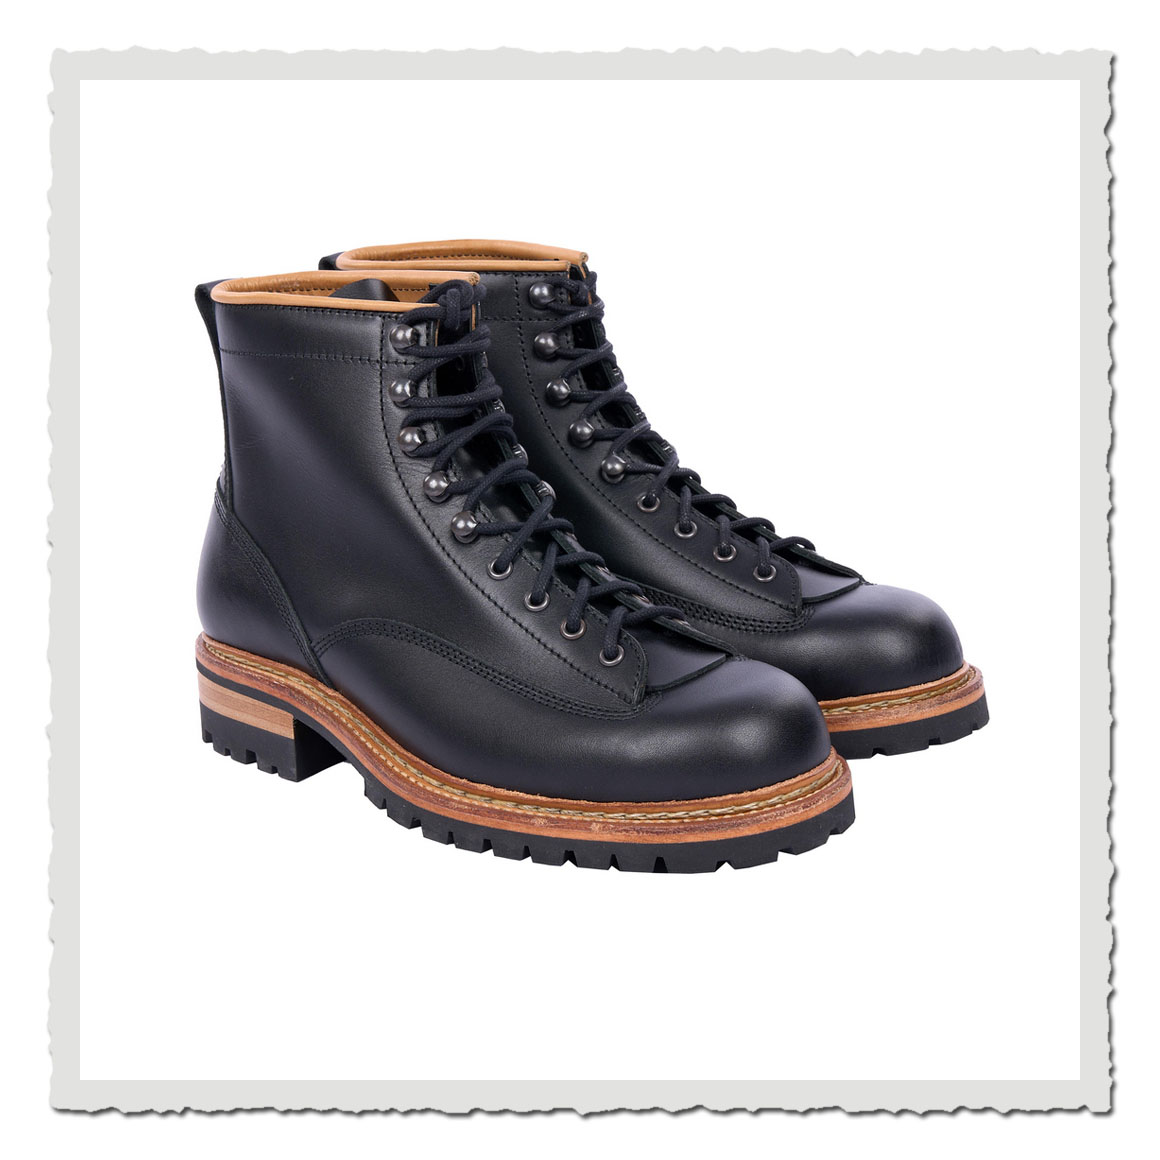 1946 Mountaineer Boots black